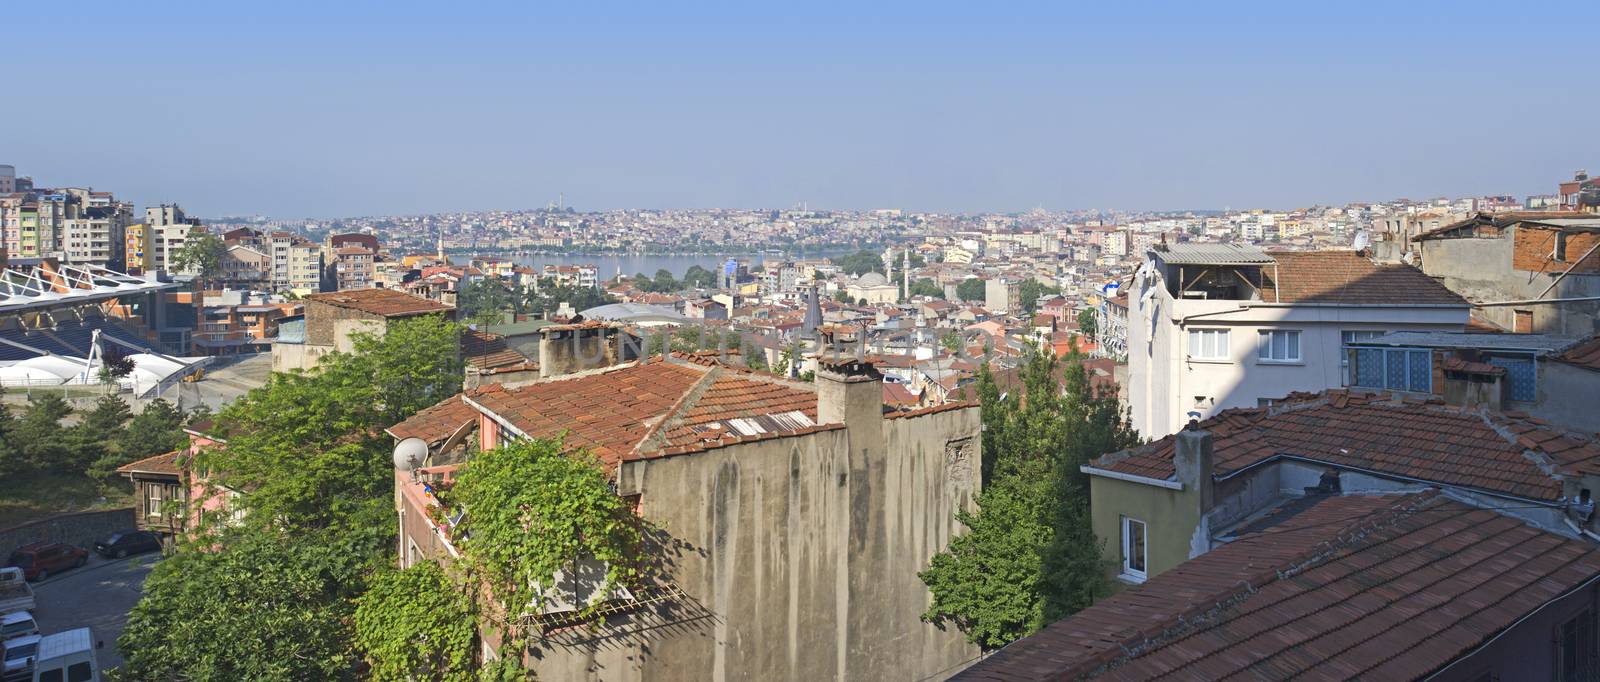 Panoramic view over an urban area of a large city with a river